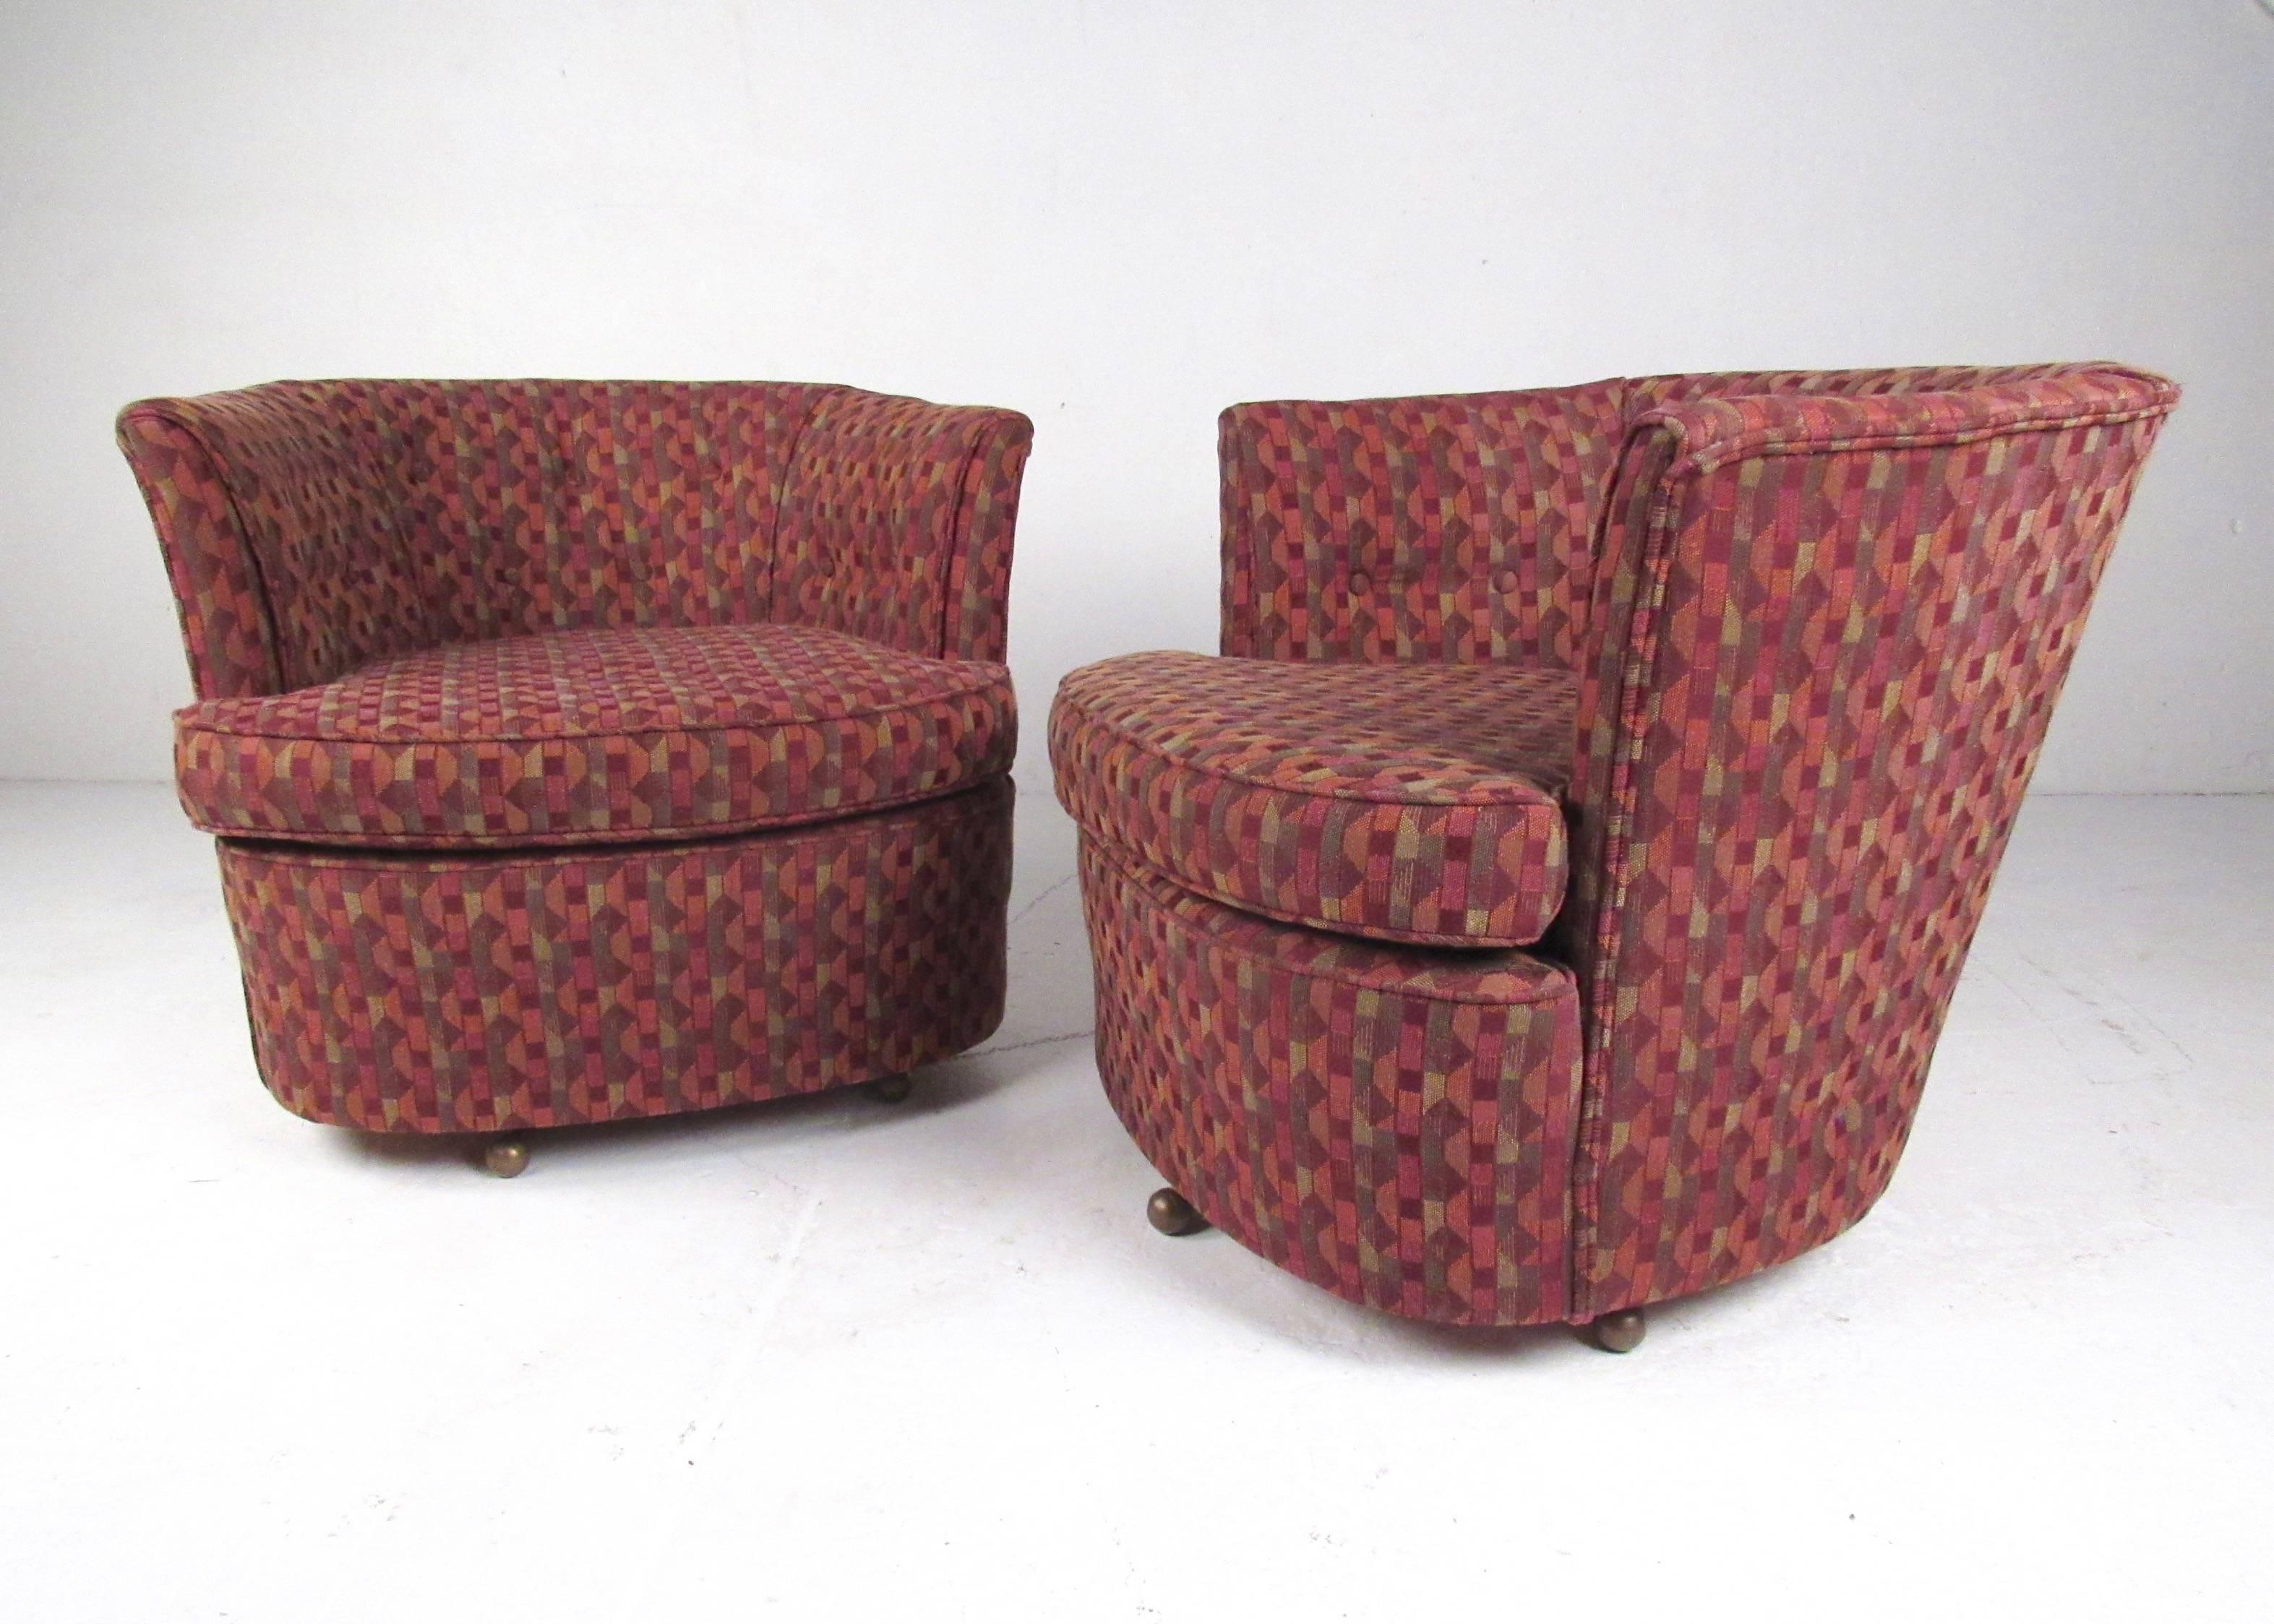 This unique pair of swivel club chairs features new upholstery with stylish modern pattern. The chairs themselves are sturdy with even swivel and the unique vintage feet of the piece protrude from the base for a nice contrast in style, showcasing